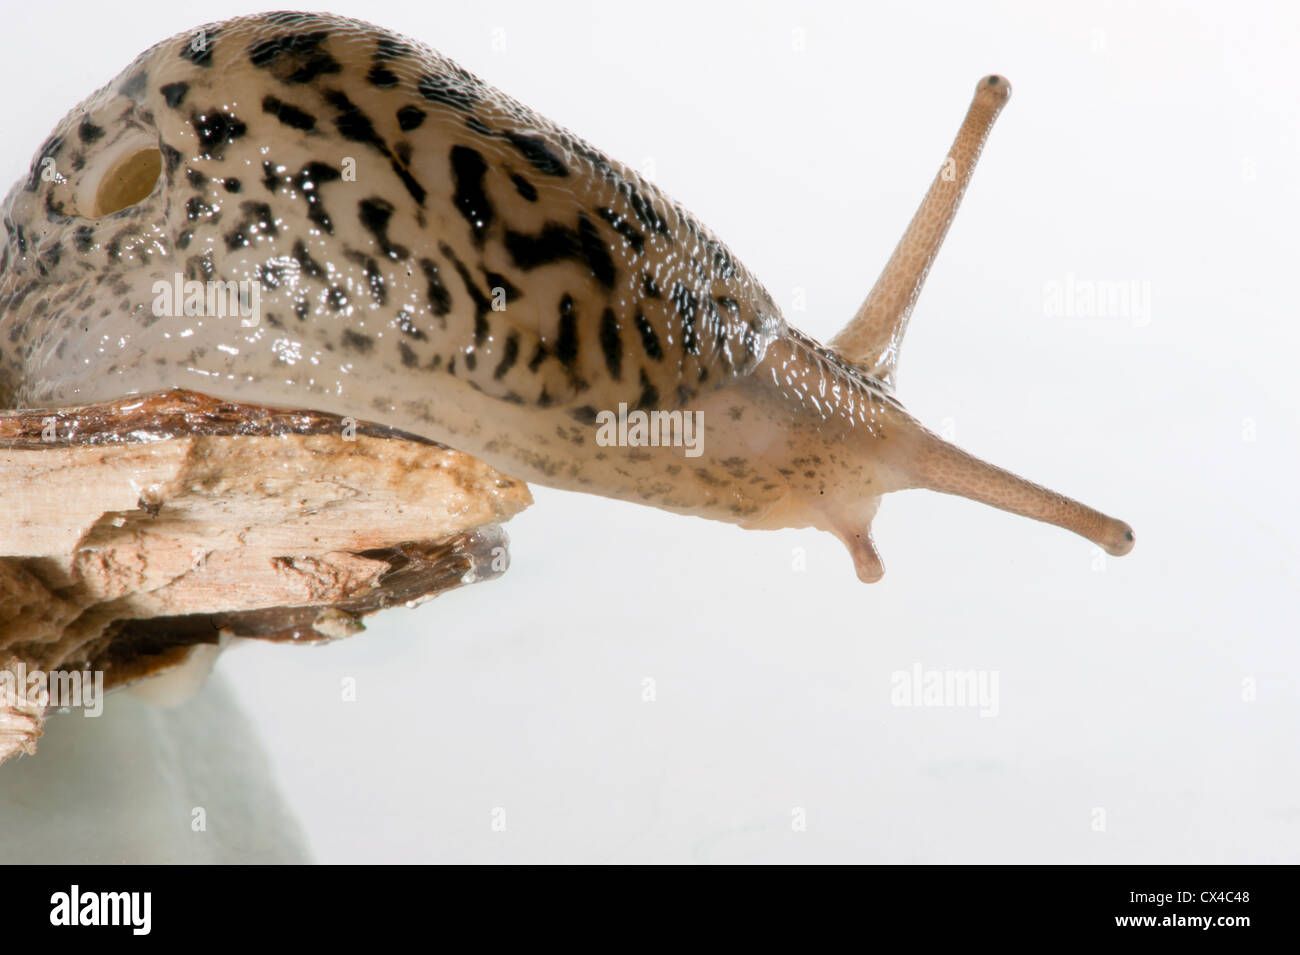 Close up of a giant leopard slug (Limax maximus) crawling off a broken branch against a white background. Stock Photo